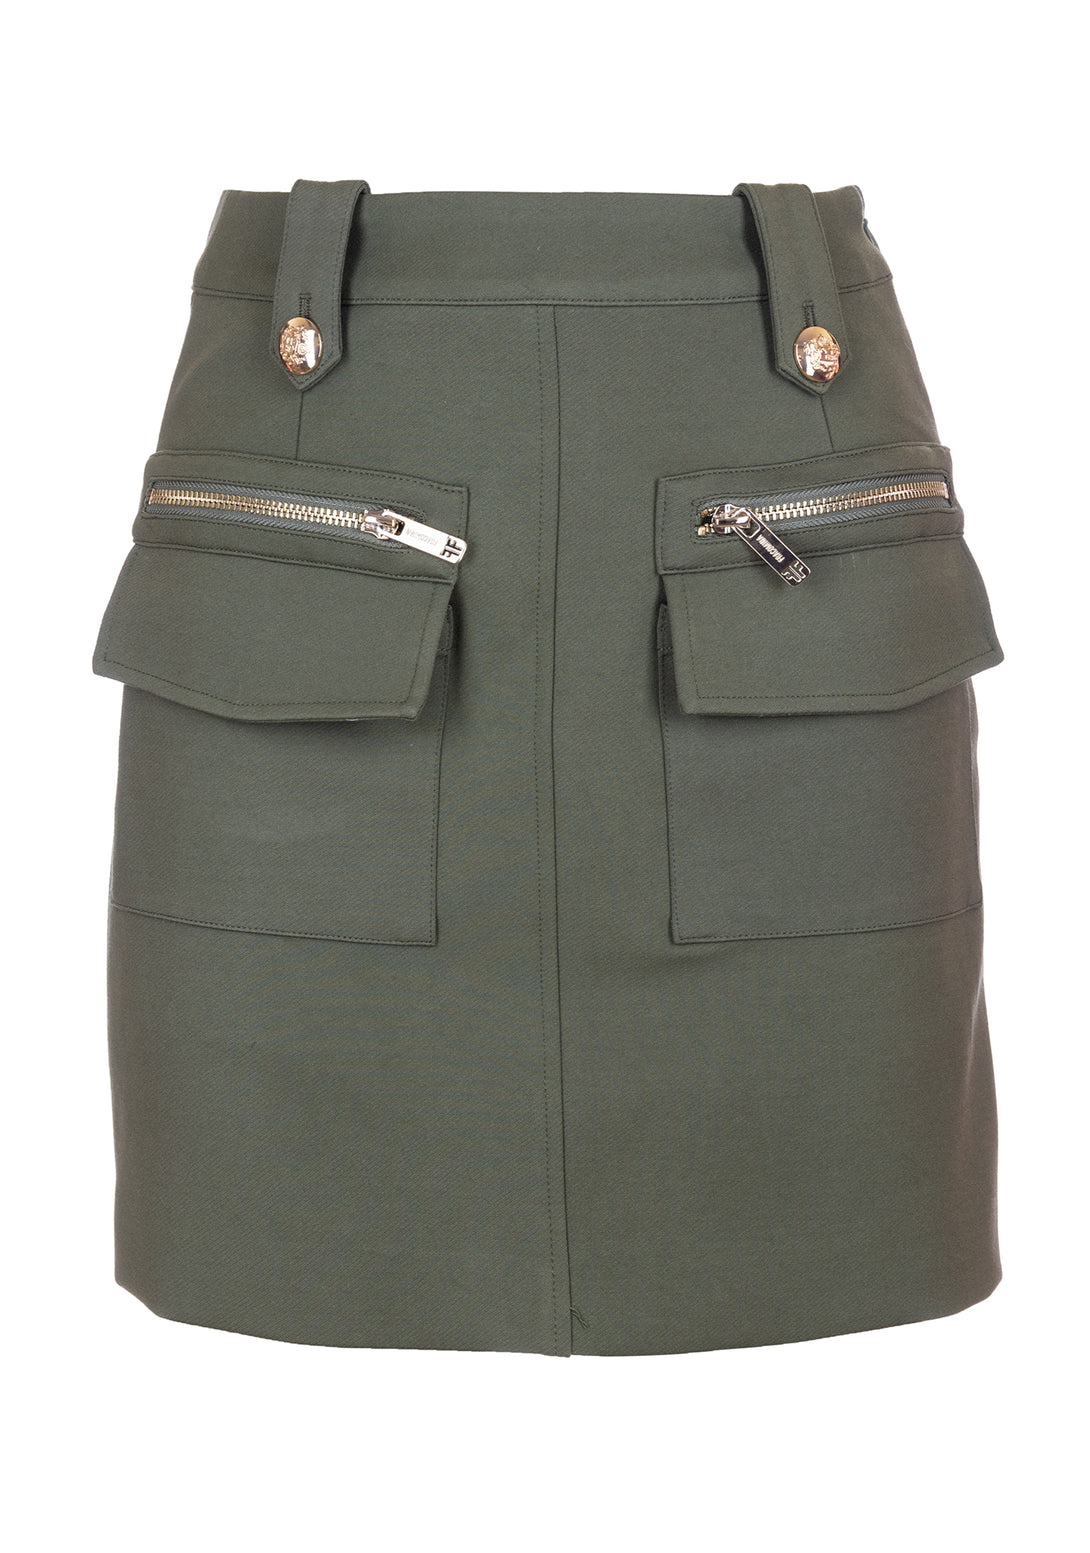 Mini skirt slim fit with big pockets on the front